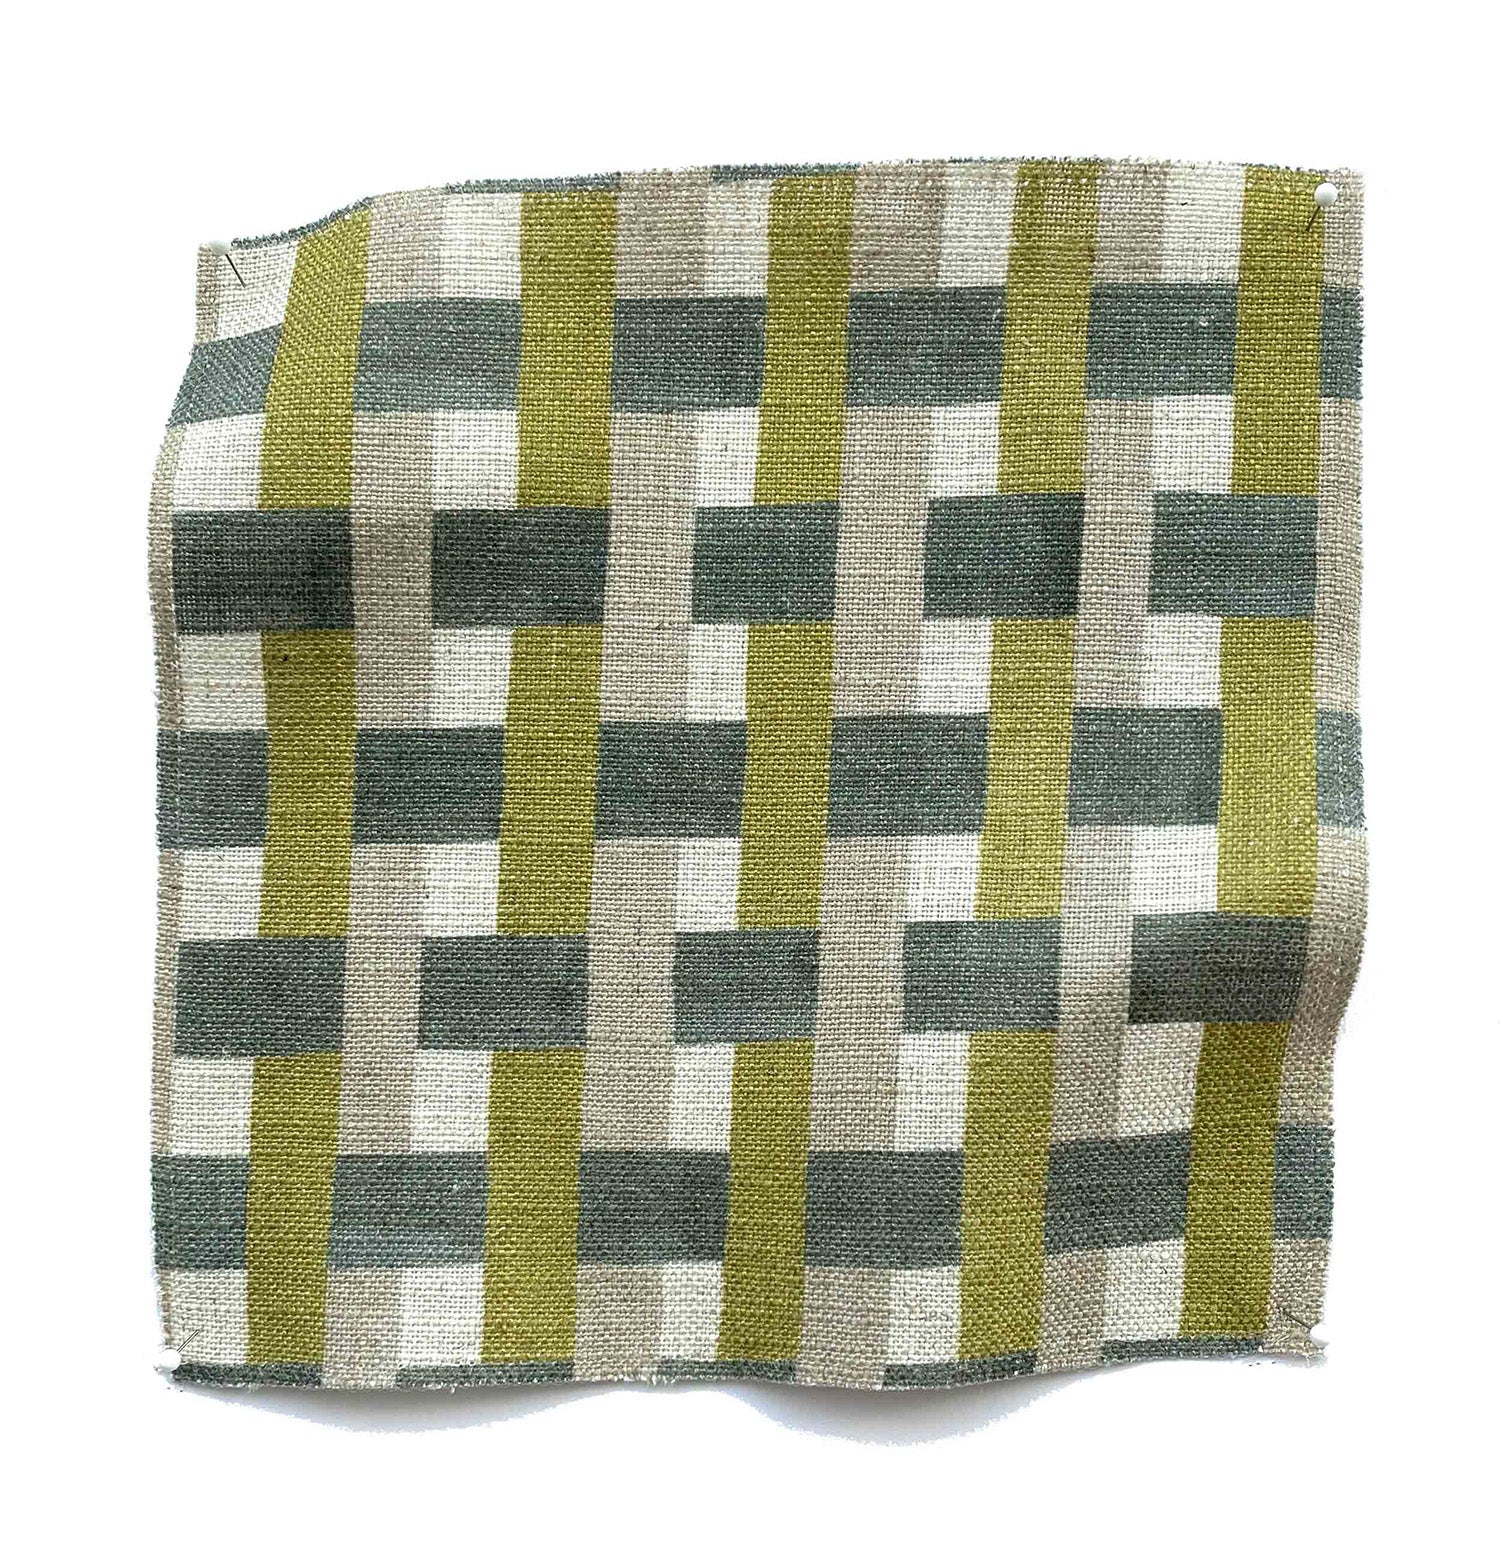 Square fabric swatch in an interlocking checked pattern in shades of tan, lime and green.